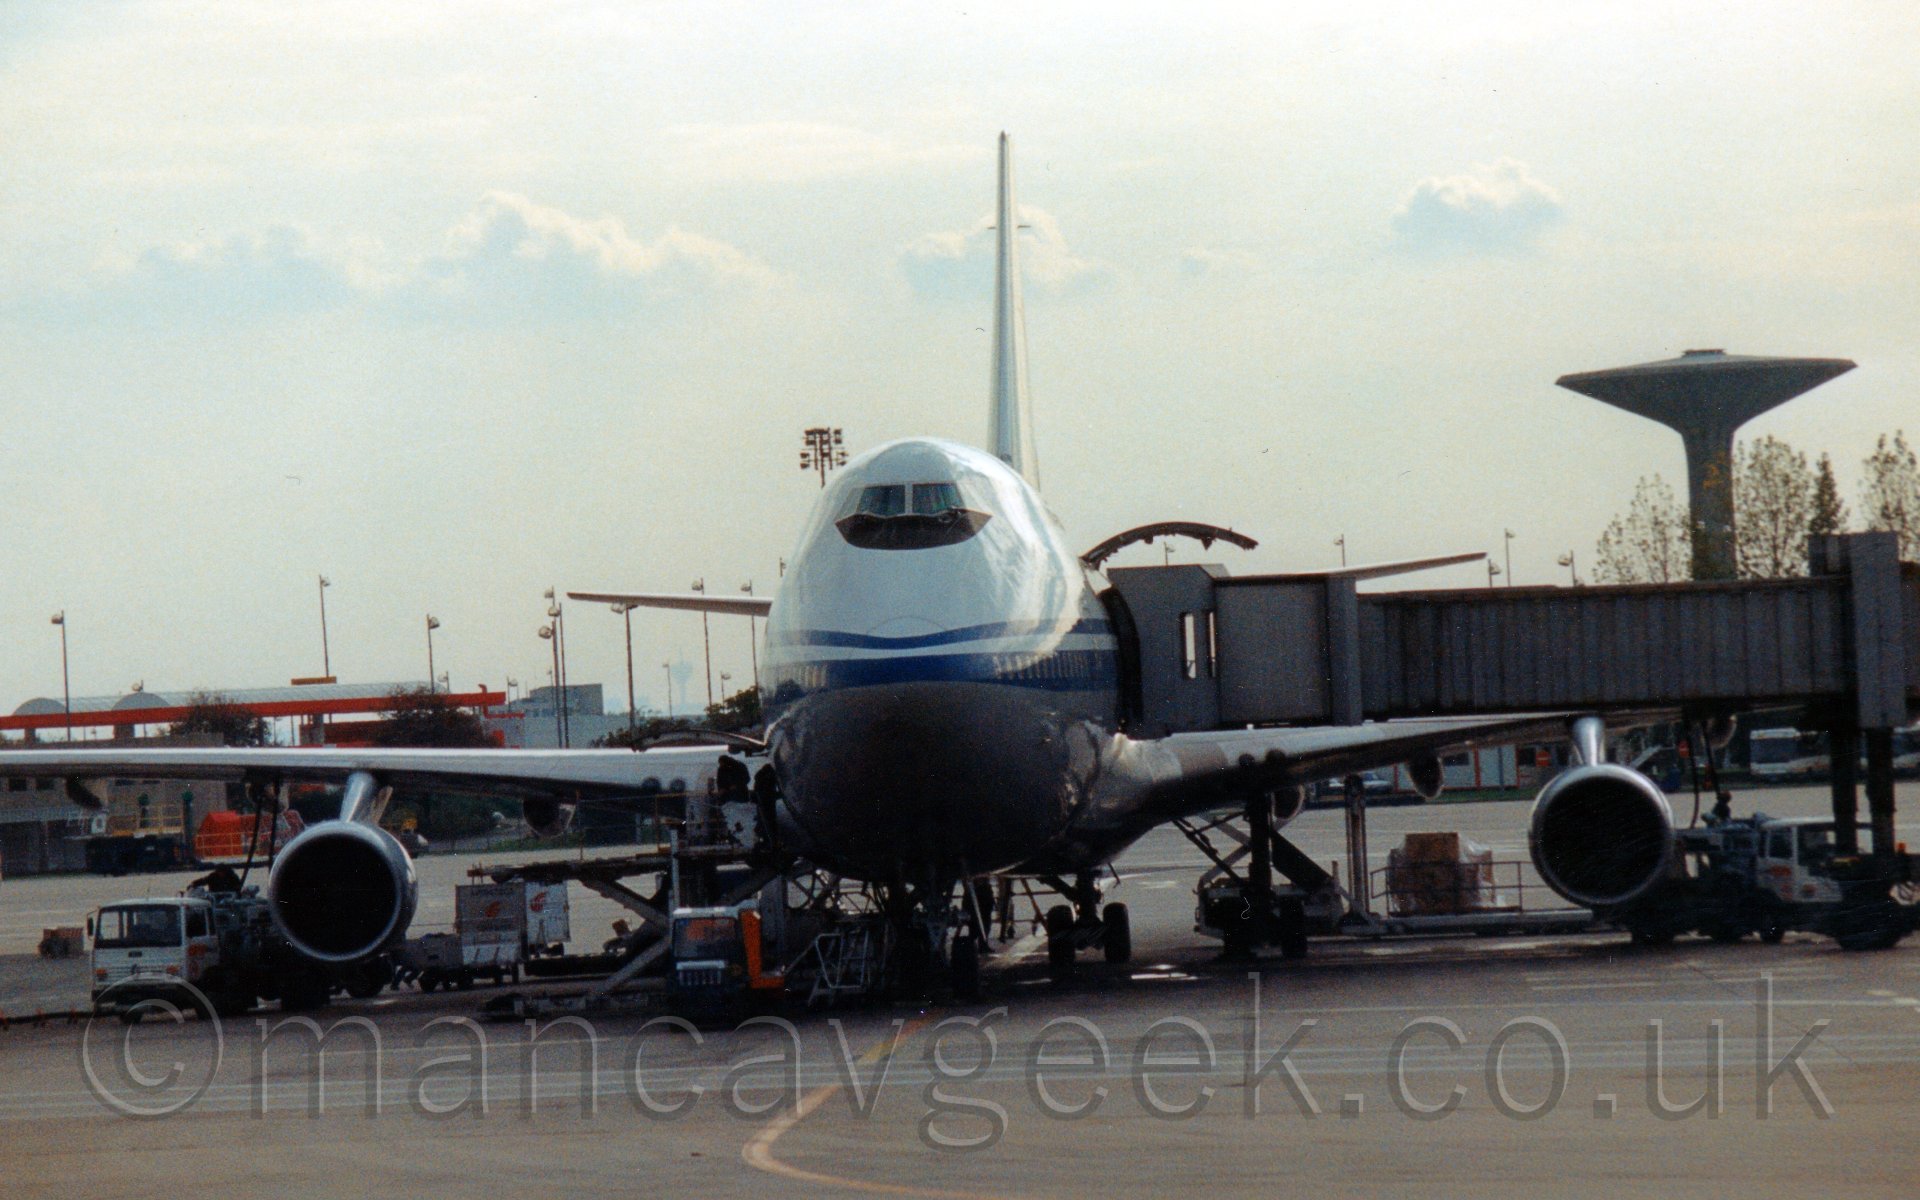 Front view of a very large 4 engined jet airliner parked almost head on to the camera, with an air bridge attached to it's left side. A large door in the side of the fuselage is open behind the air bridge, with a large fuselage panel appearing to hang over the bridge. The plane is mostly white, with a grey belly, and a blue stripe running back along the fuselage from the nose. There are various fuel tankers and baggage carts around the eingines and wheels of this plane. The planes tail reaches up into the sky, which is a flat white with occasional lower fluffy clouds.